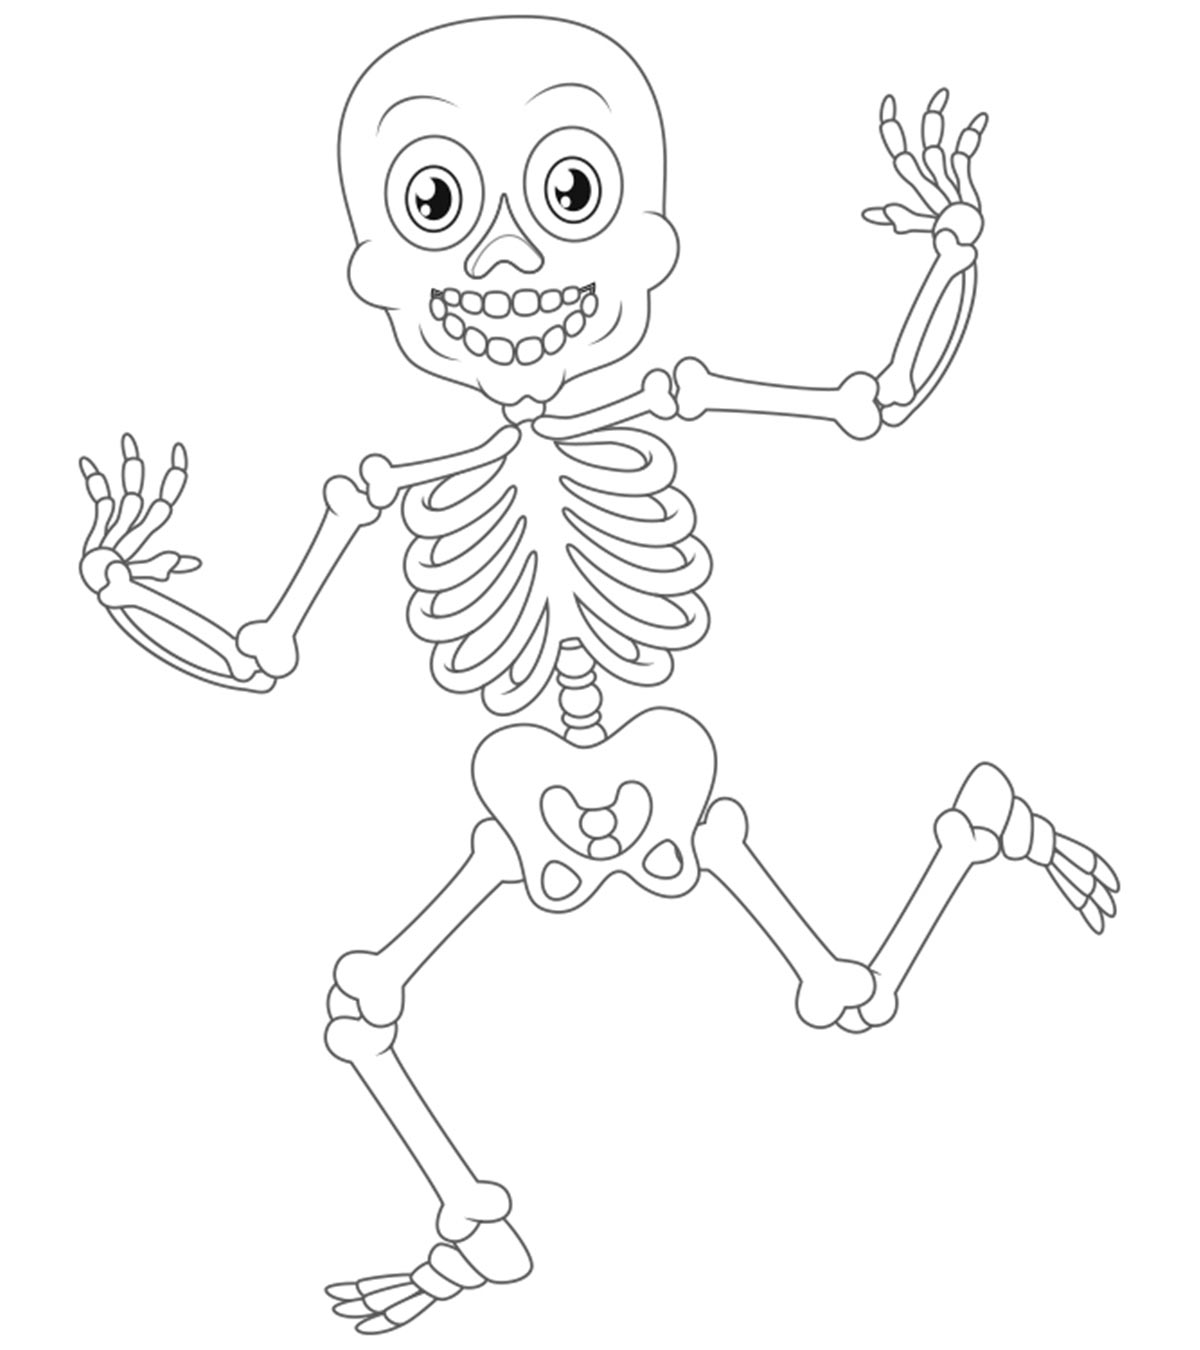 11 Best Skeleton Coloring Pages For Your Toddler